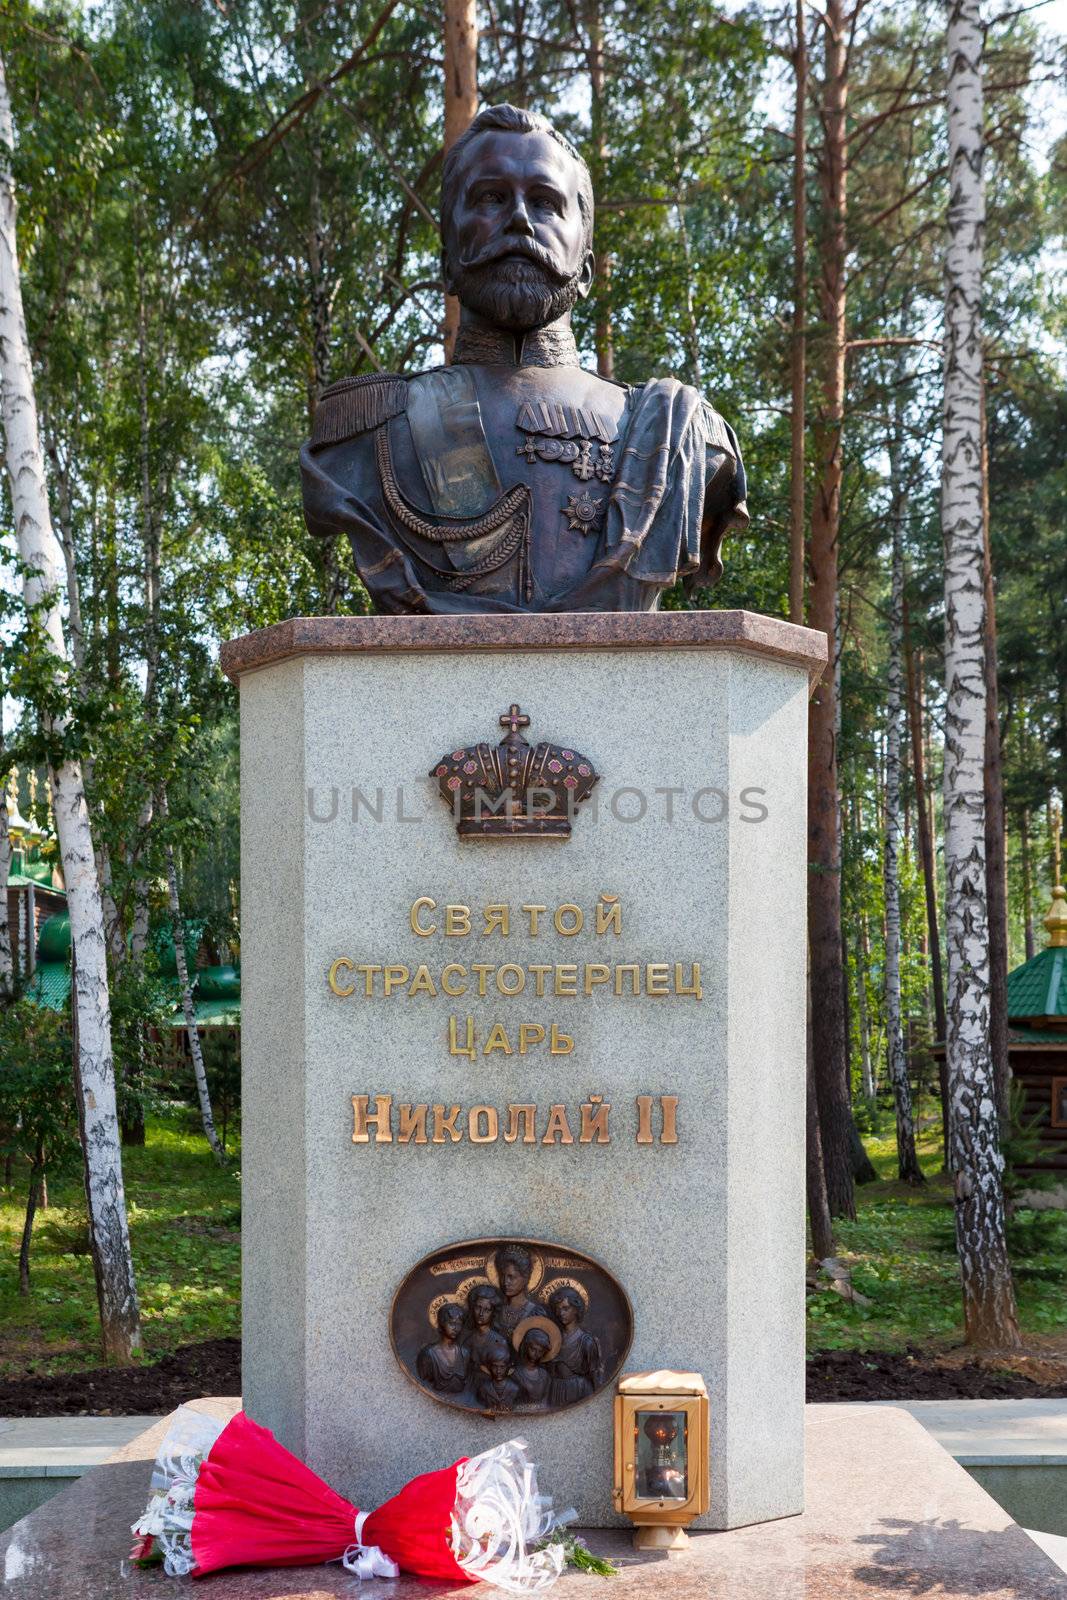 Monument to the last tsar of Russia Nikolay 2 in the monastery territory in honor of Sacred Regal Strastoterptsev on "Ganina Yame"